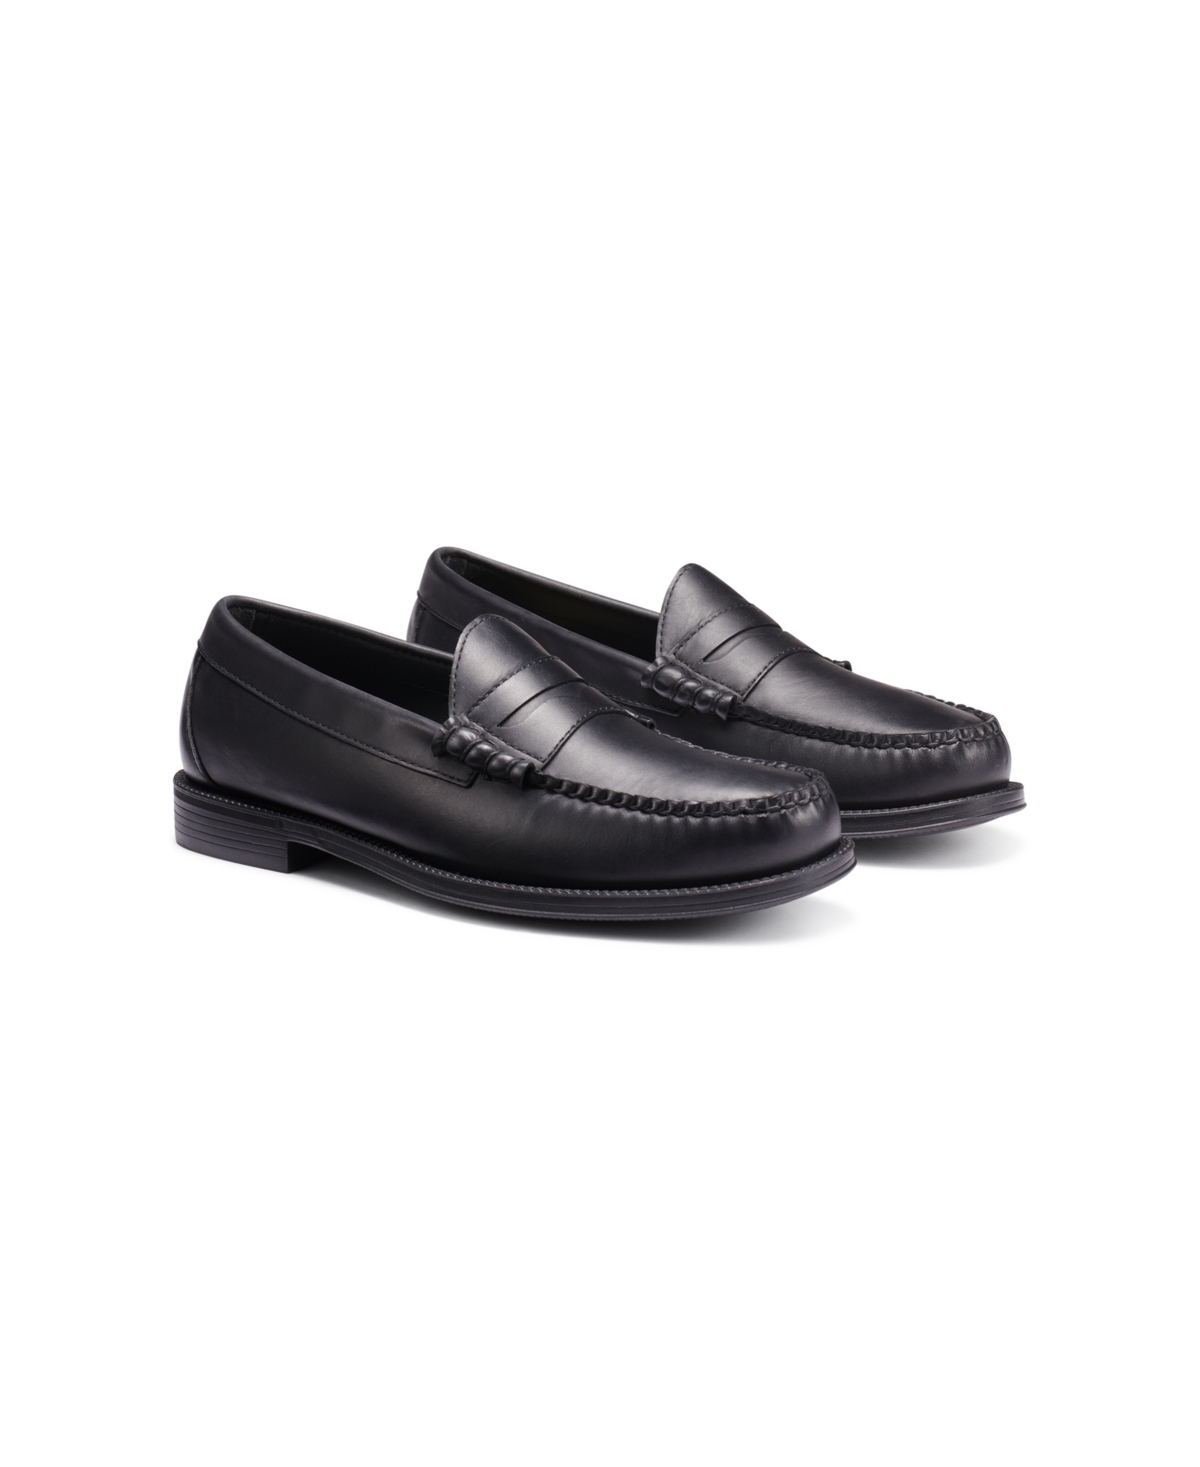 G.h.bass Men's Larson Easy Weejuns Penny Loafers - Black